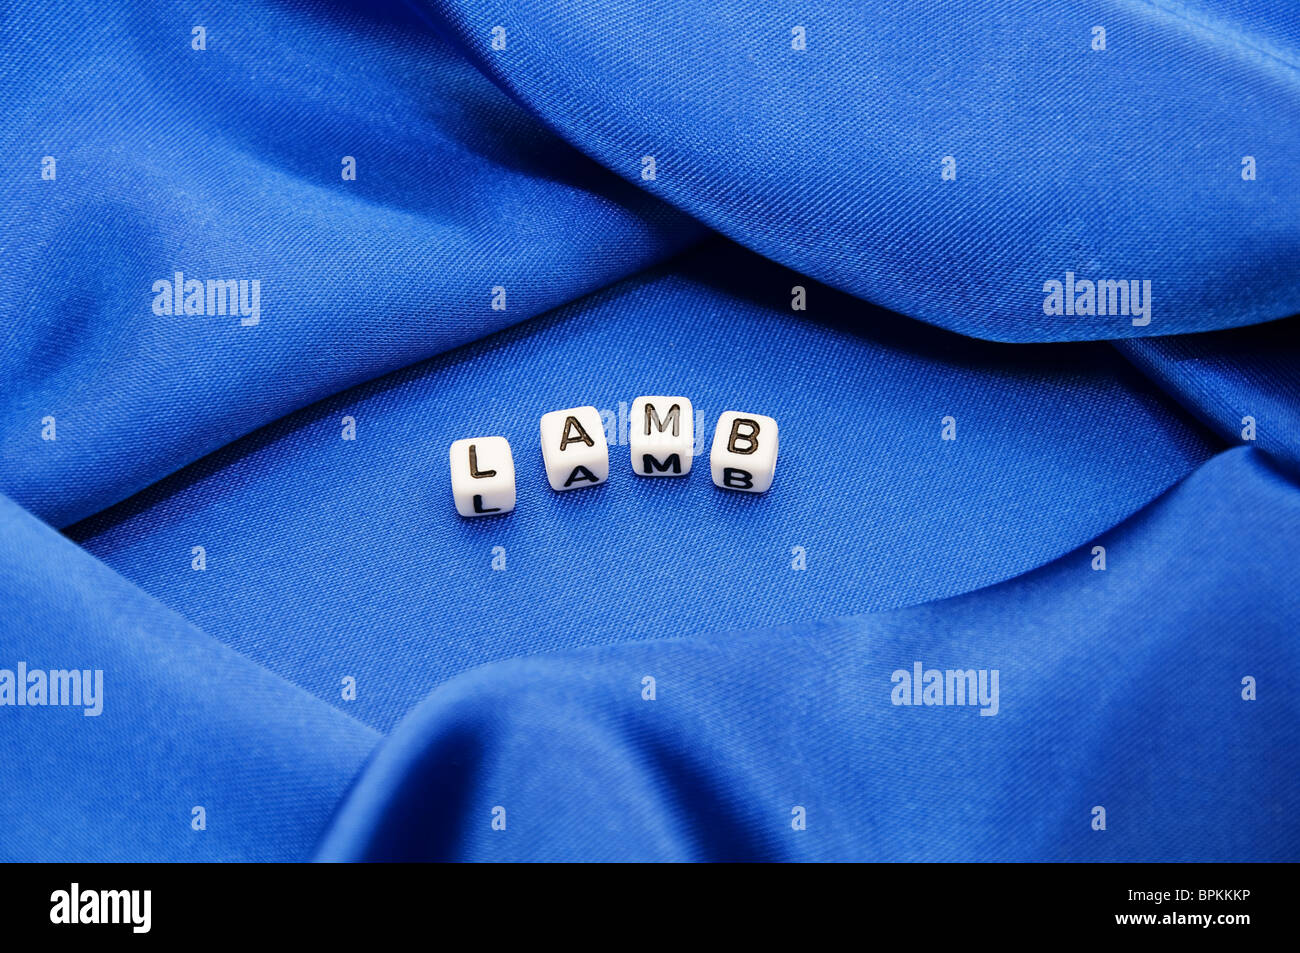 Royal blue satin background with rich folds and wrinkles for texture is the word lamb in black and white cube lettering series Stock Photo